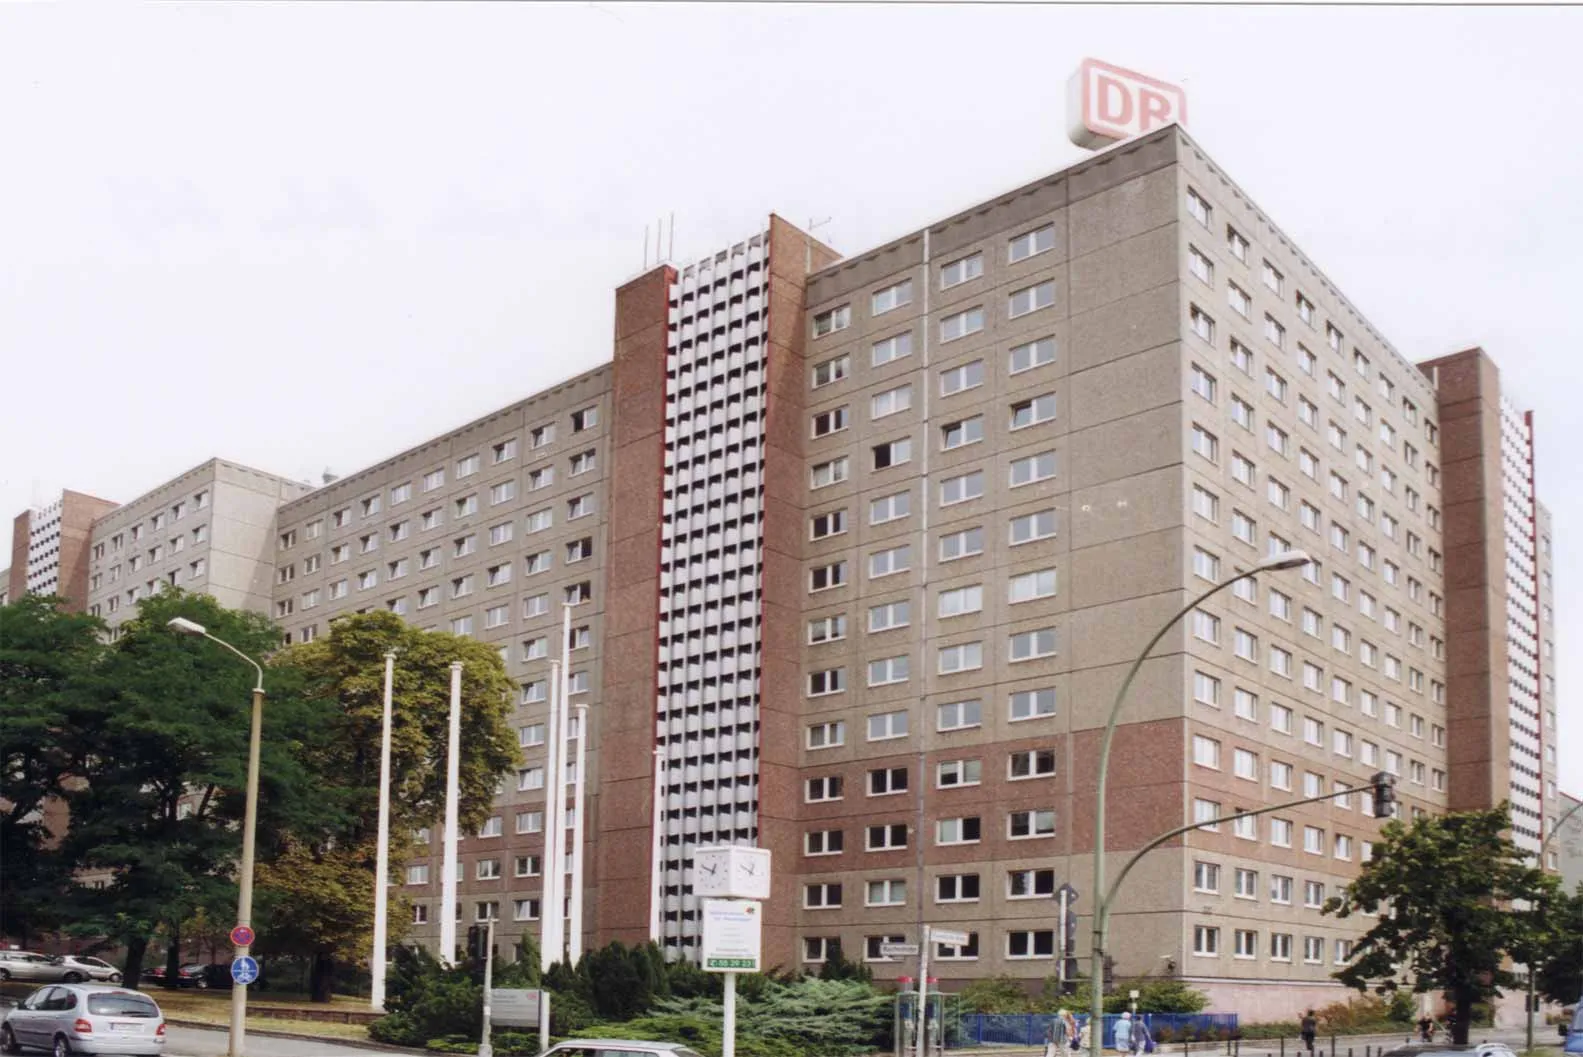 Photo showing: Office building of the HVA (foreign intelligence service) in the Ministry for State Security (Stasi) in Berlin-Lichtenberg. 2003 one of the offices of Deutsche Bahn AG.